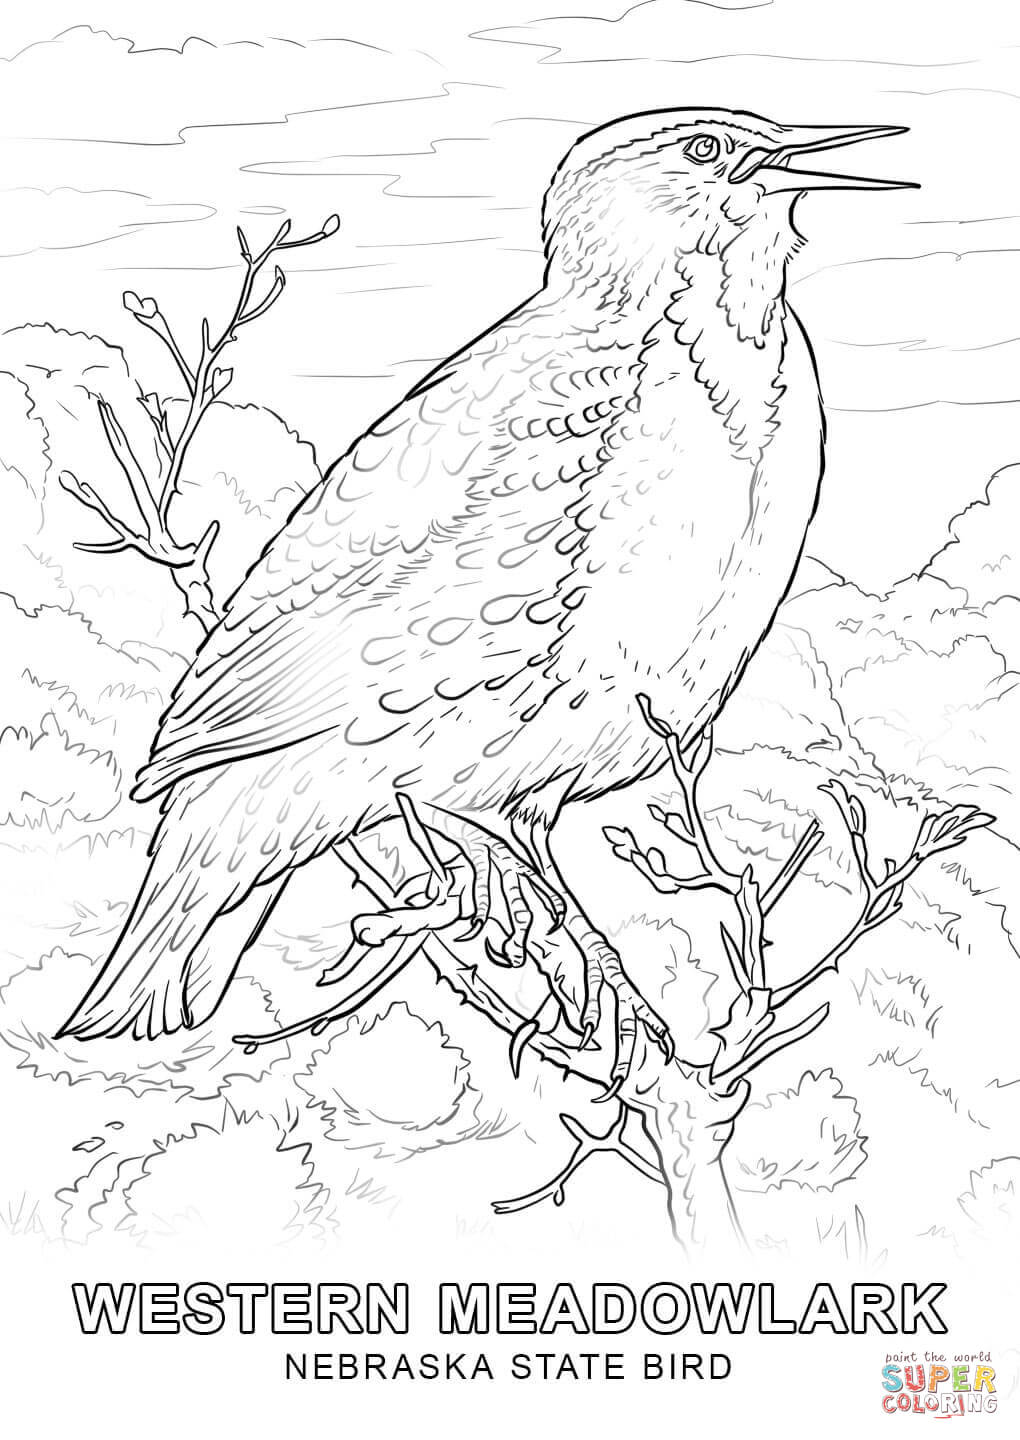 Nebraska State Bird coloring page | Free Printable Coloring Pages